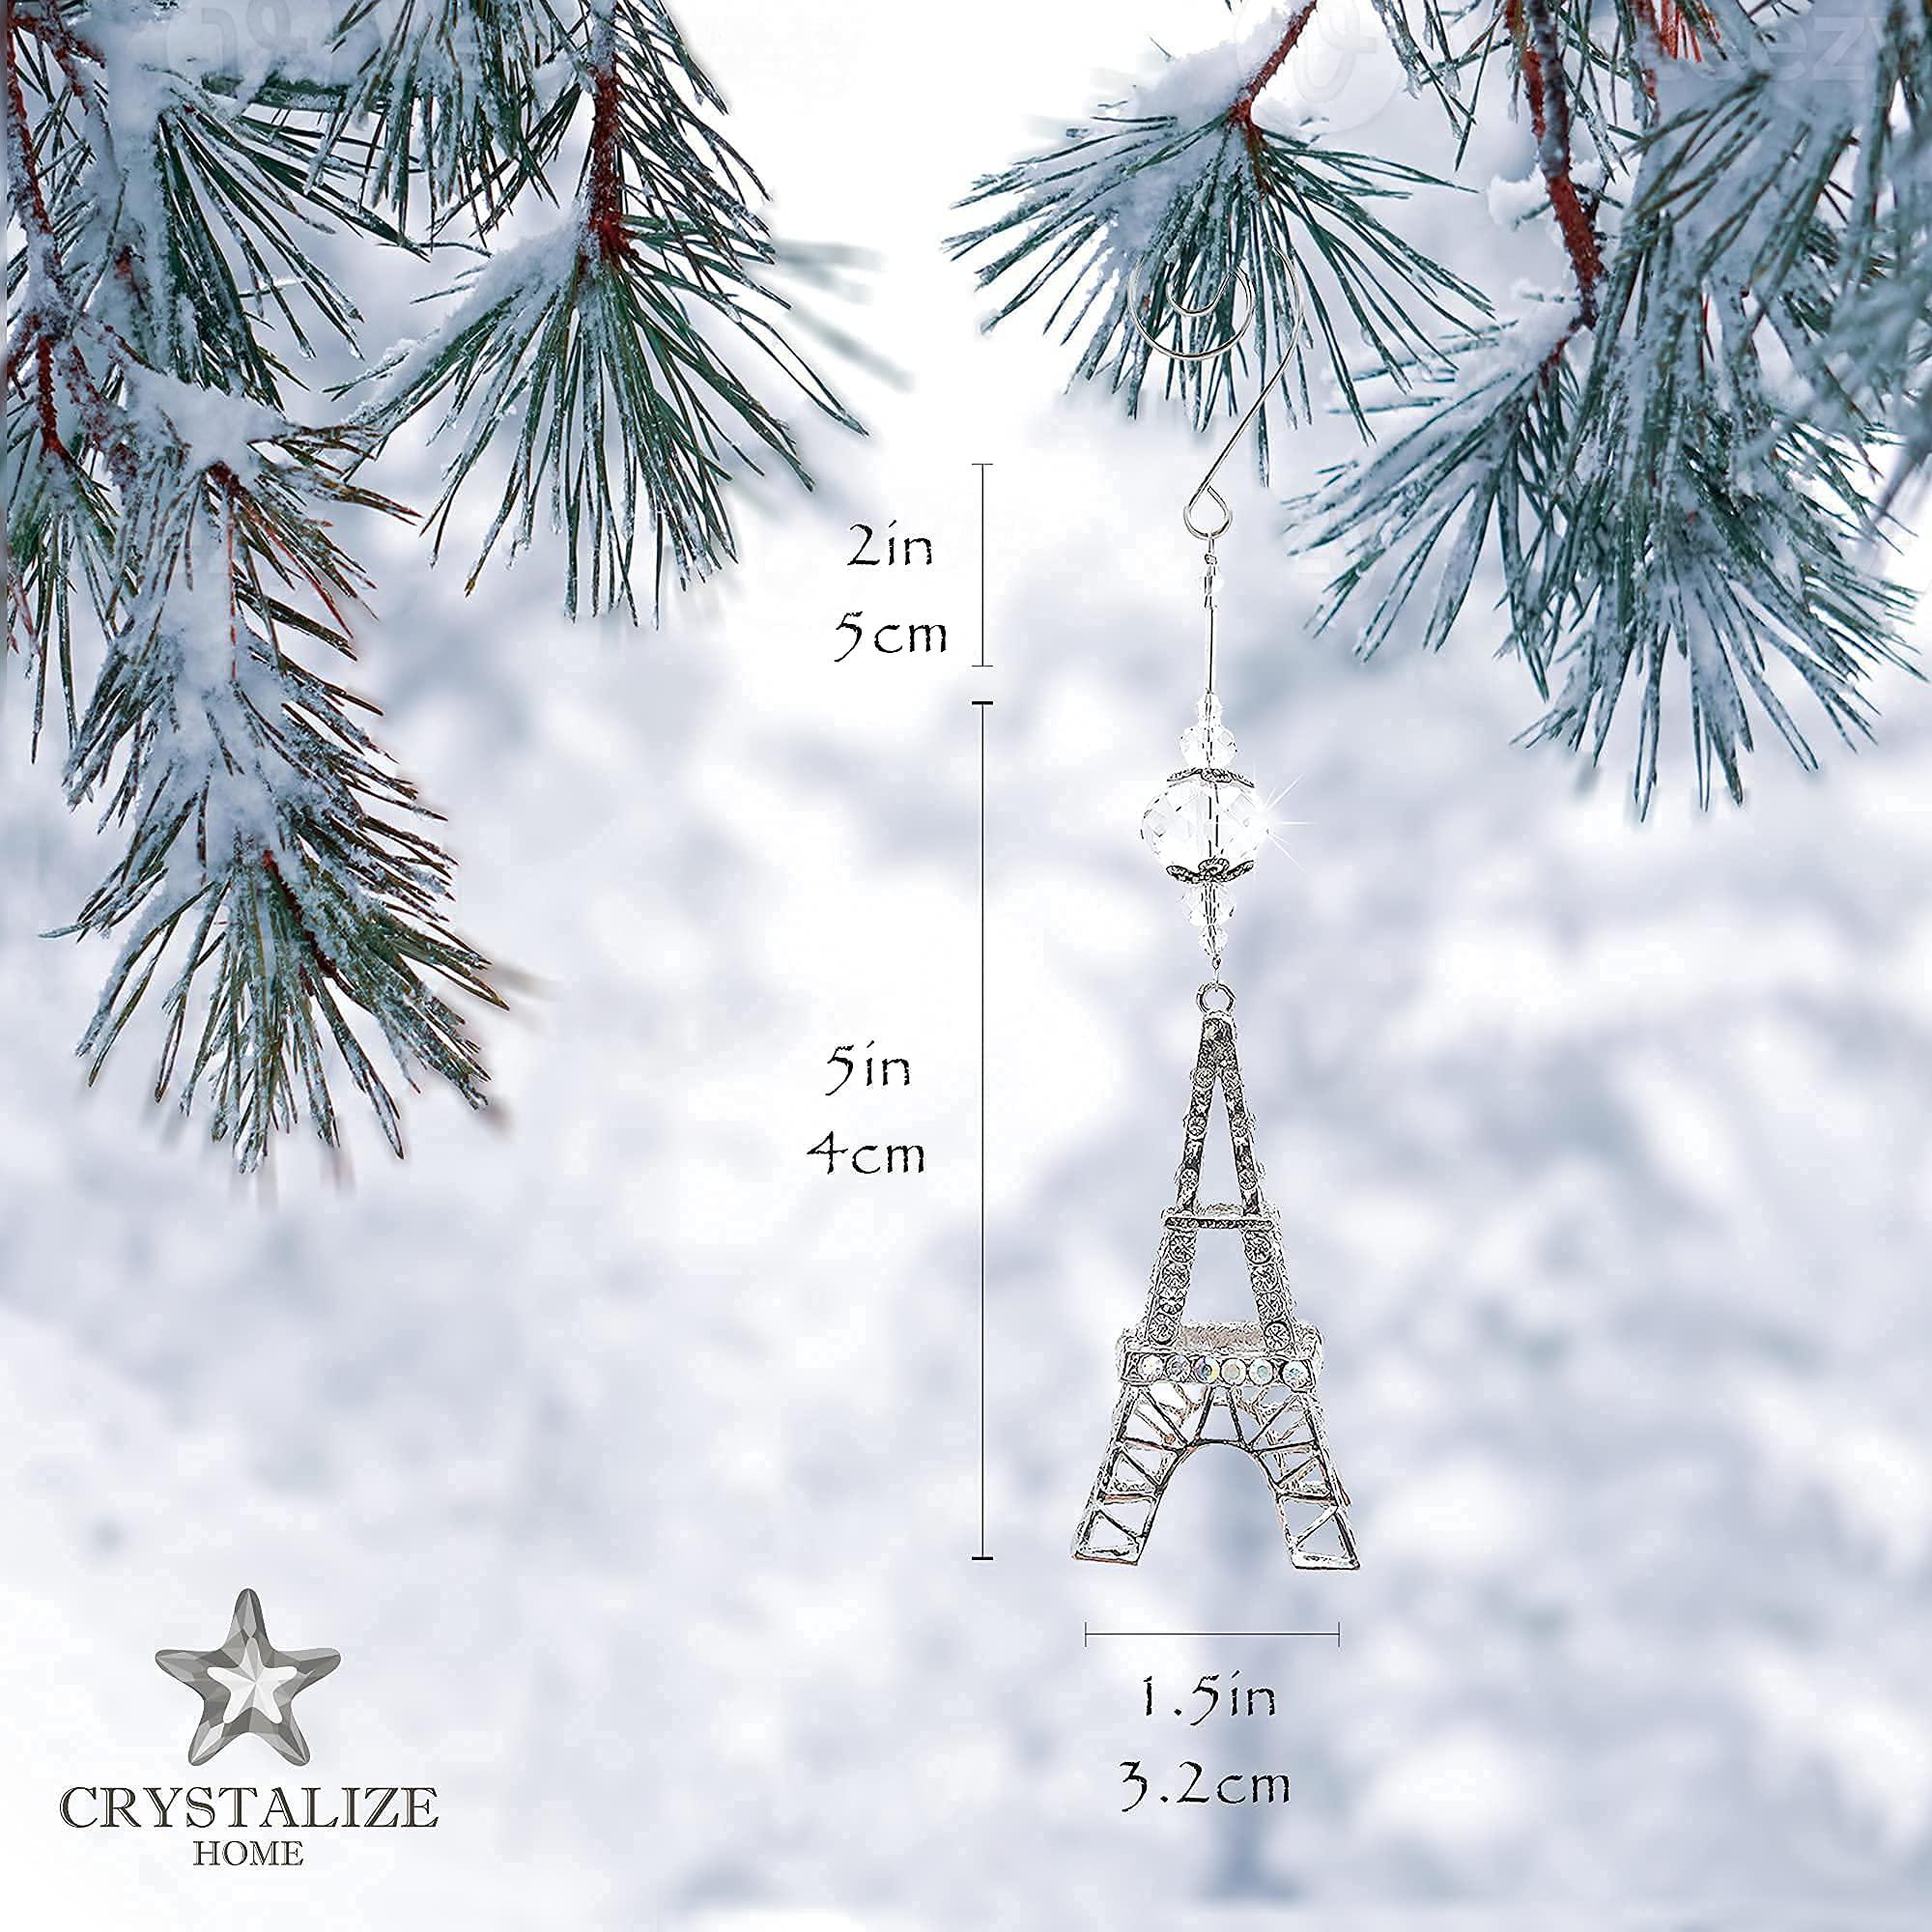 crystalize home crystal tower - eiffel tower - paris gifts - ornament paris - eiffel tower decor - eiffel tower ornament for home dcor, chris